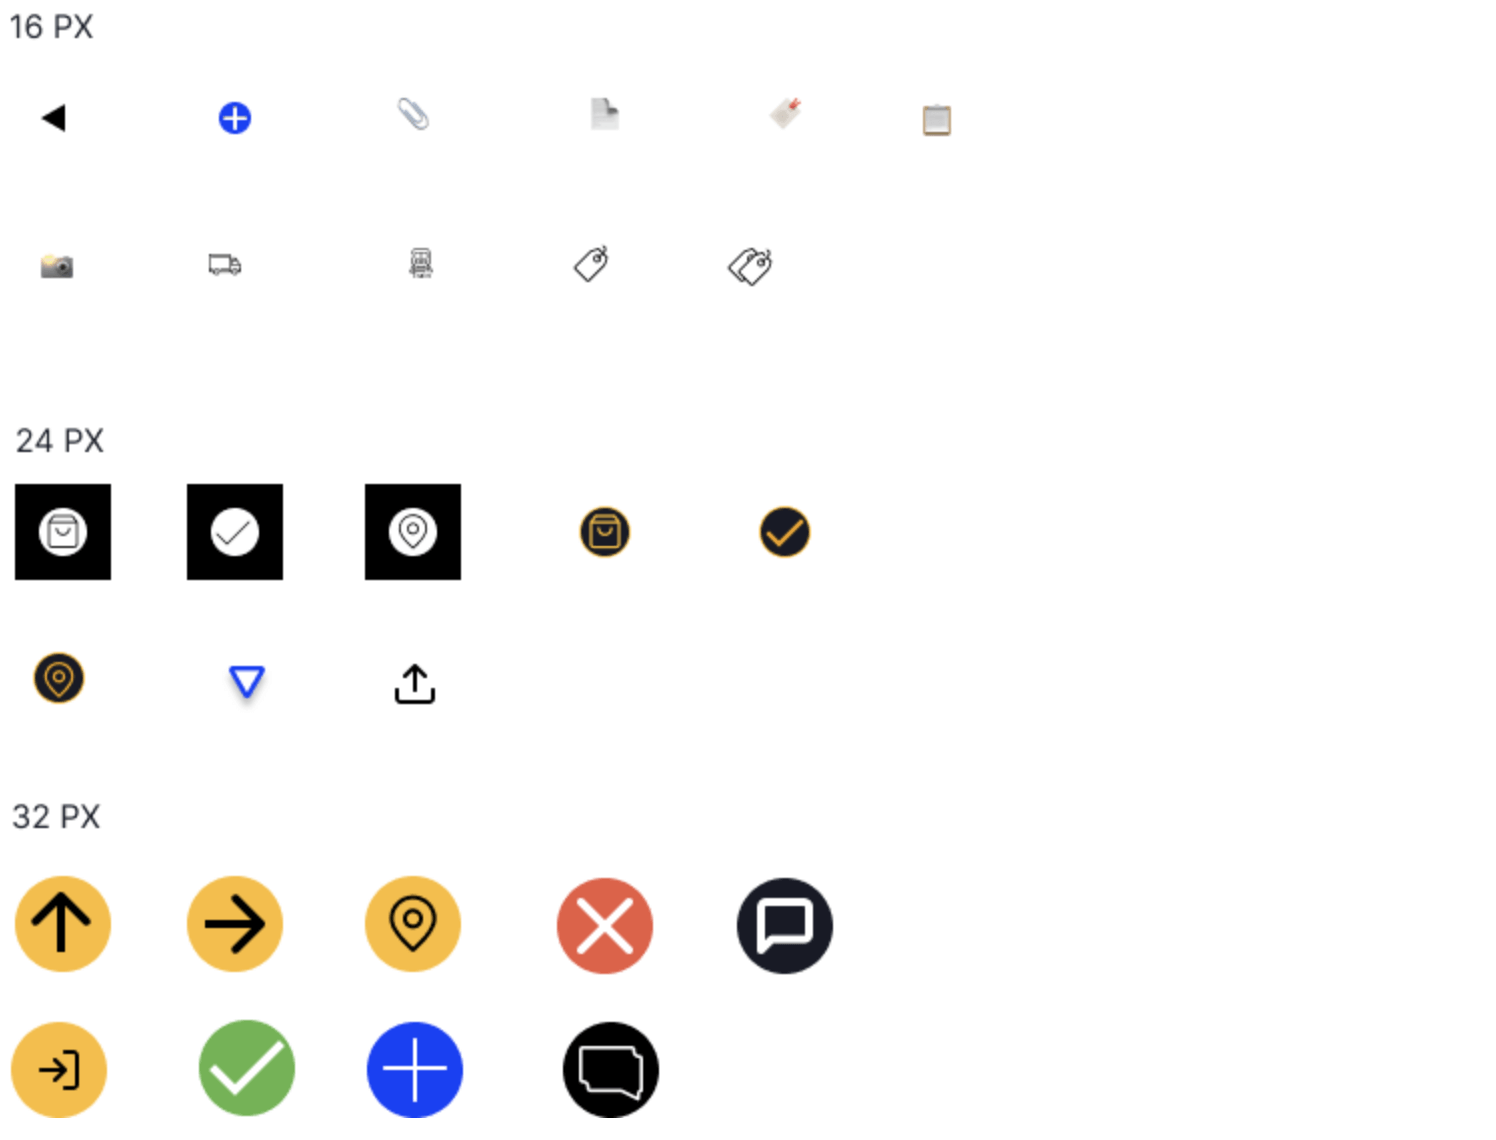 All icons found in the app categorized by size